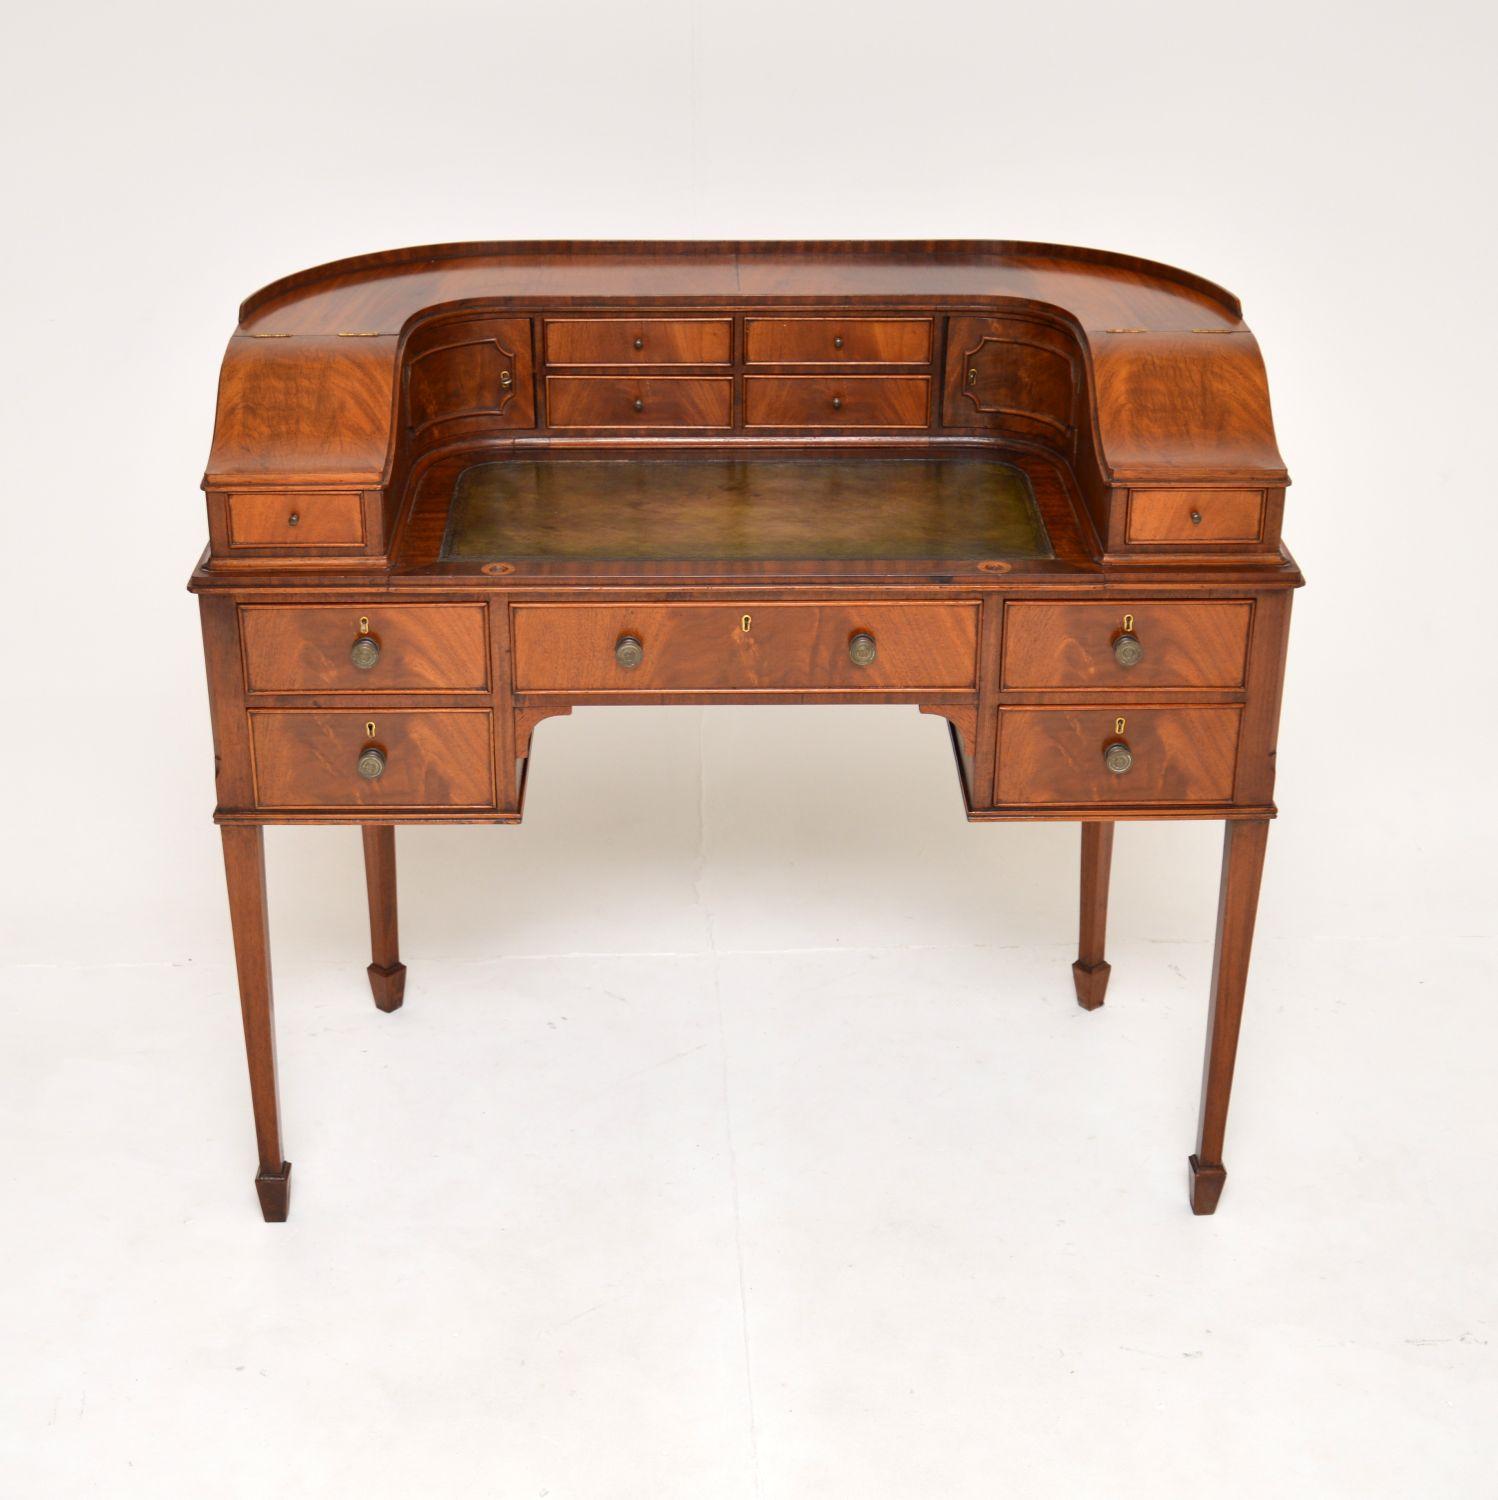 A superb antique Carlton House desk. This was made in England, it dates from around the 1900-1920 period.

This is of amazing quality, it is very well built and heavy. There are five generous drawers in the lower section, with ten smaller drawers